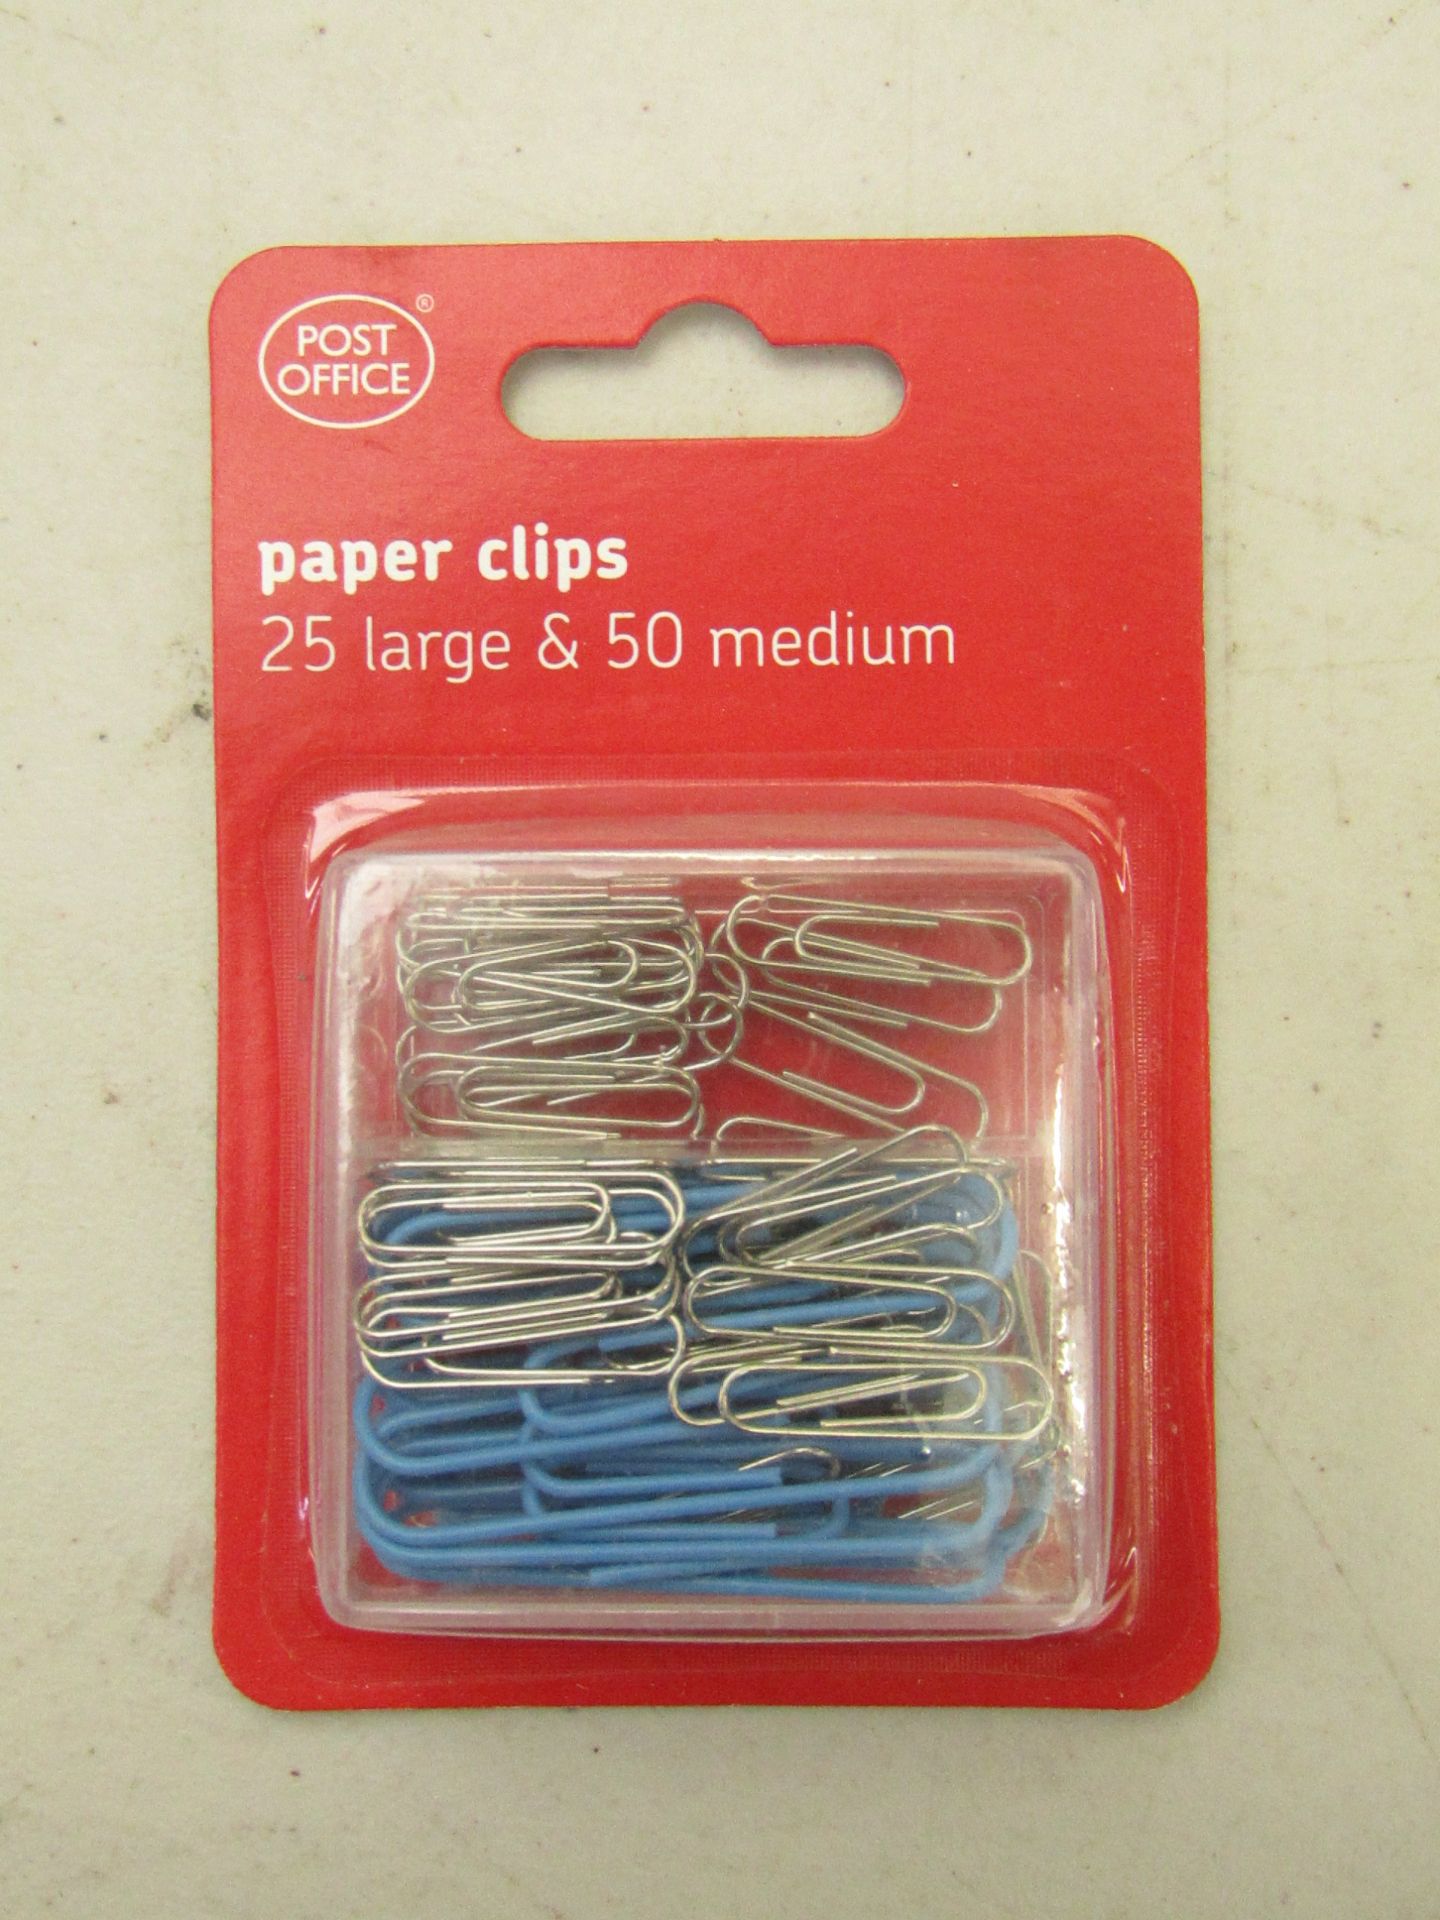 10x boxes each containing 6x packs of Post Office paper clips.